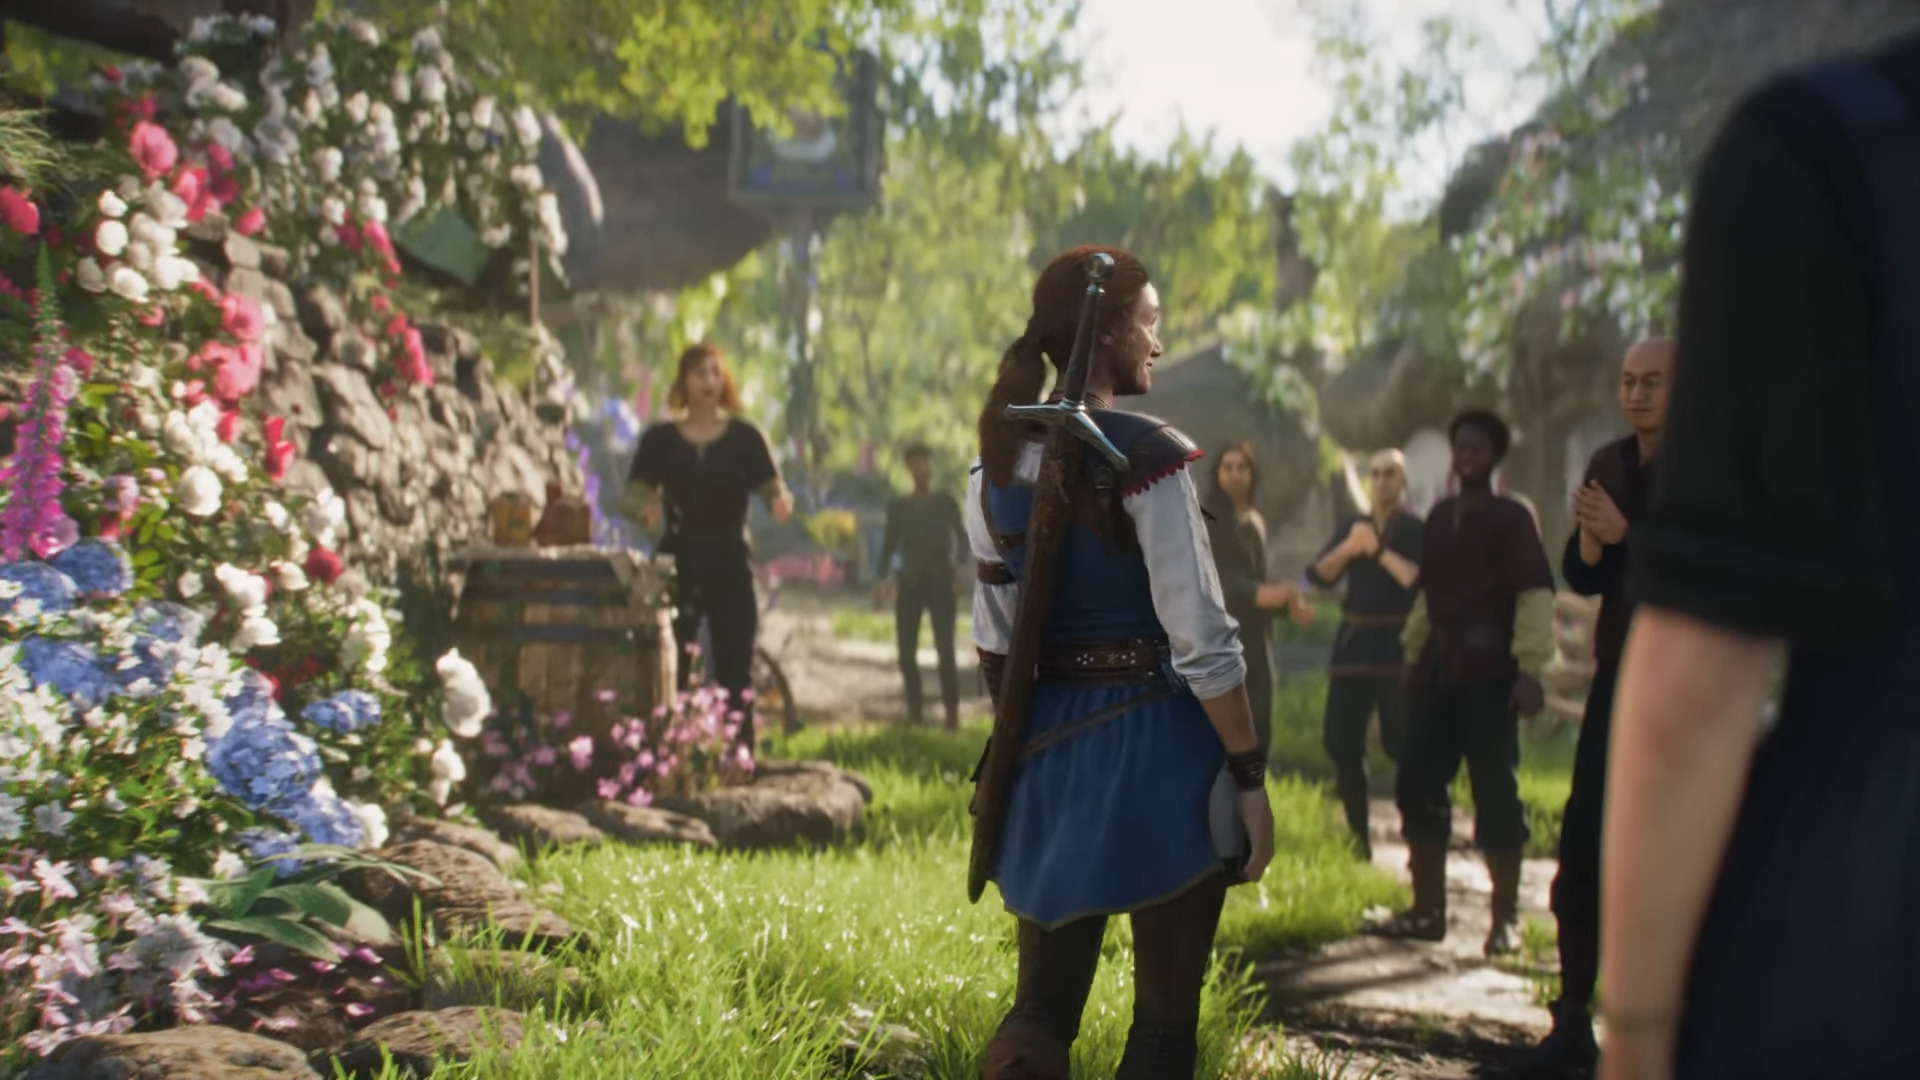 fable-reboot-gets-comedic-trailer-involving-heroes-and-giants-techradar